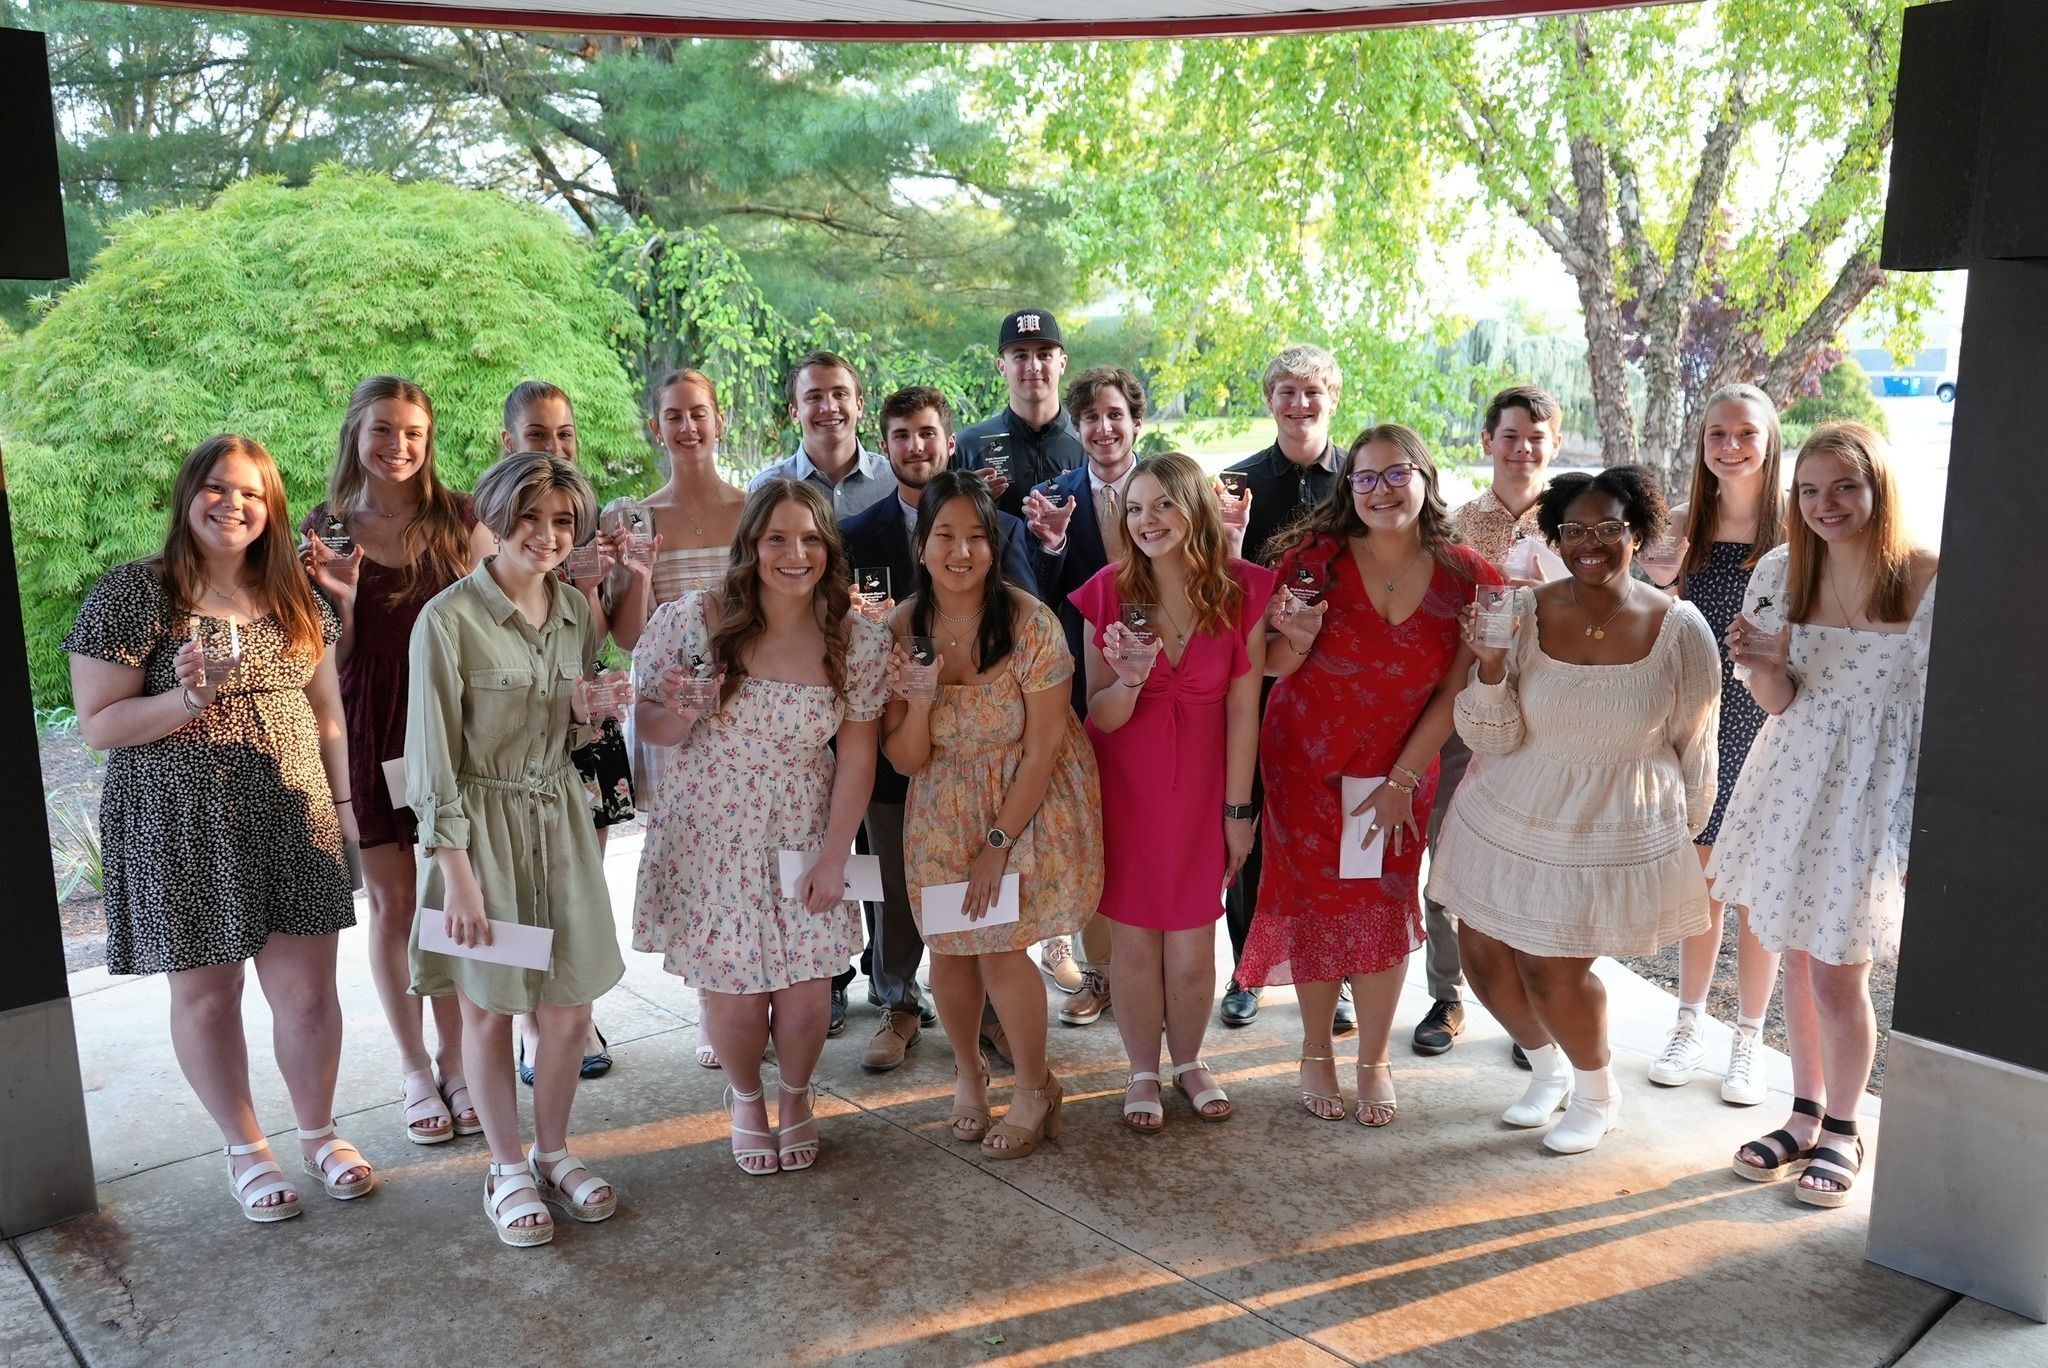 WASDEF Gifts Awards to Top 5 Percent of Senior Class in Annual Top Hat Dinner